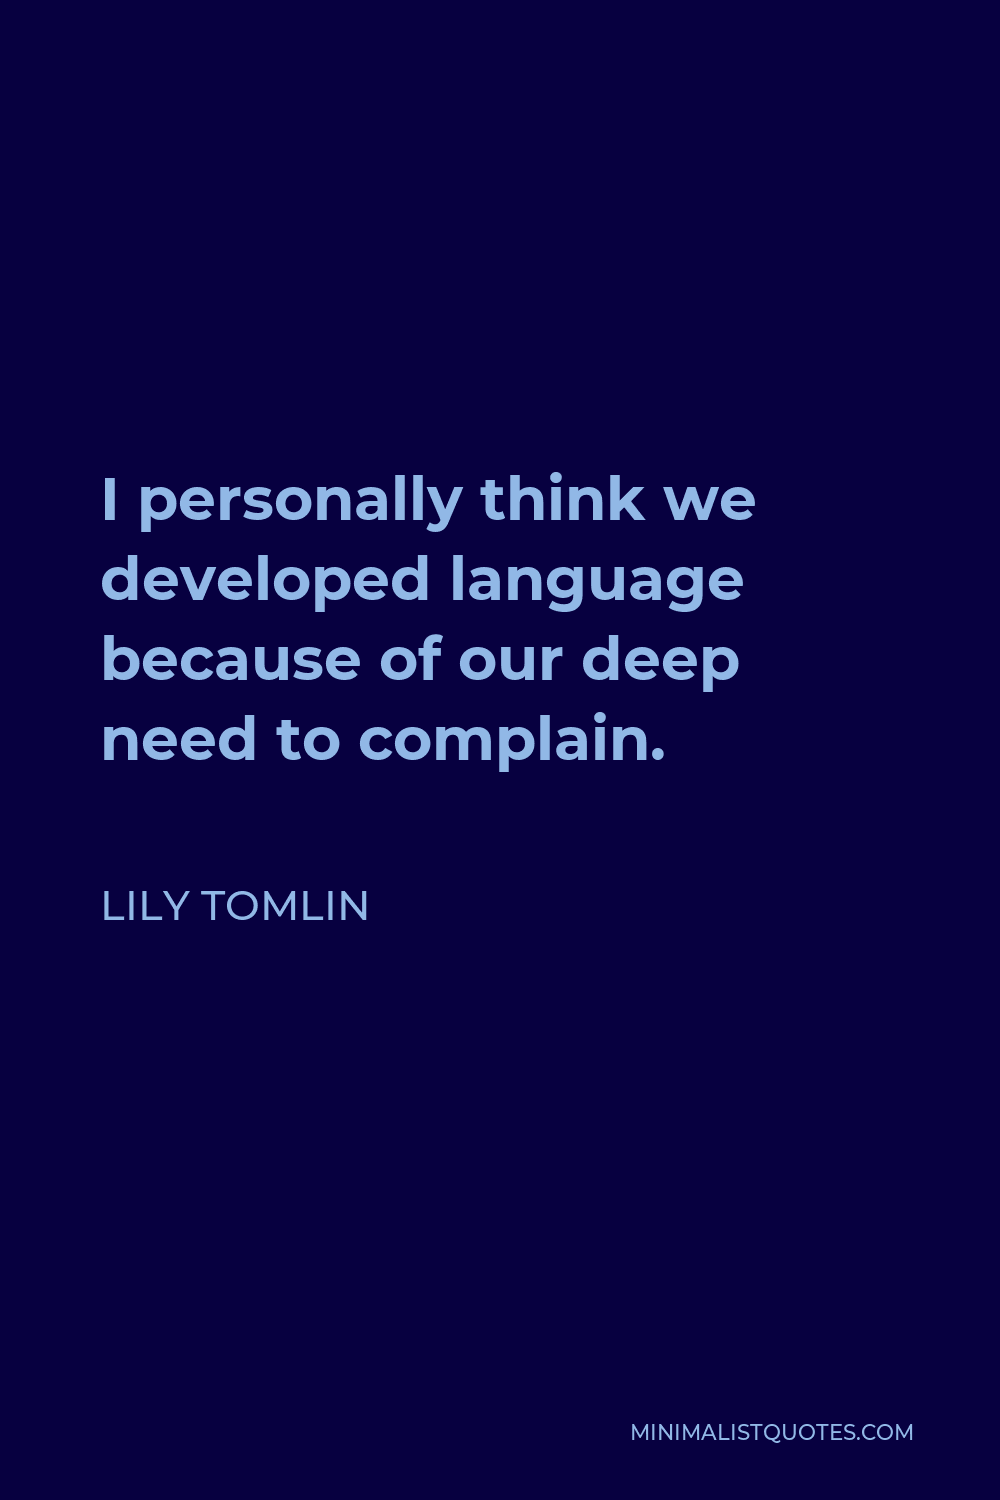 Lily Tomlin Quote - I personally think we developed language because of our deep need to complain.